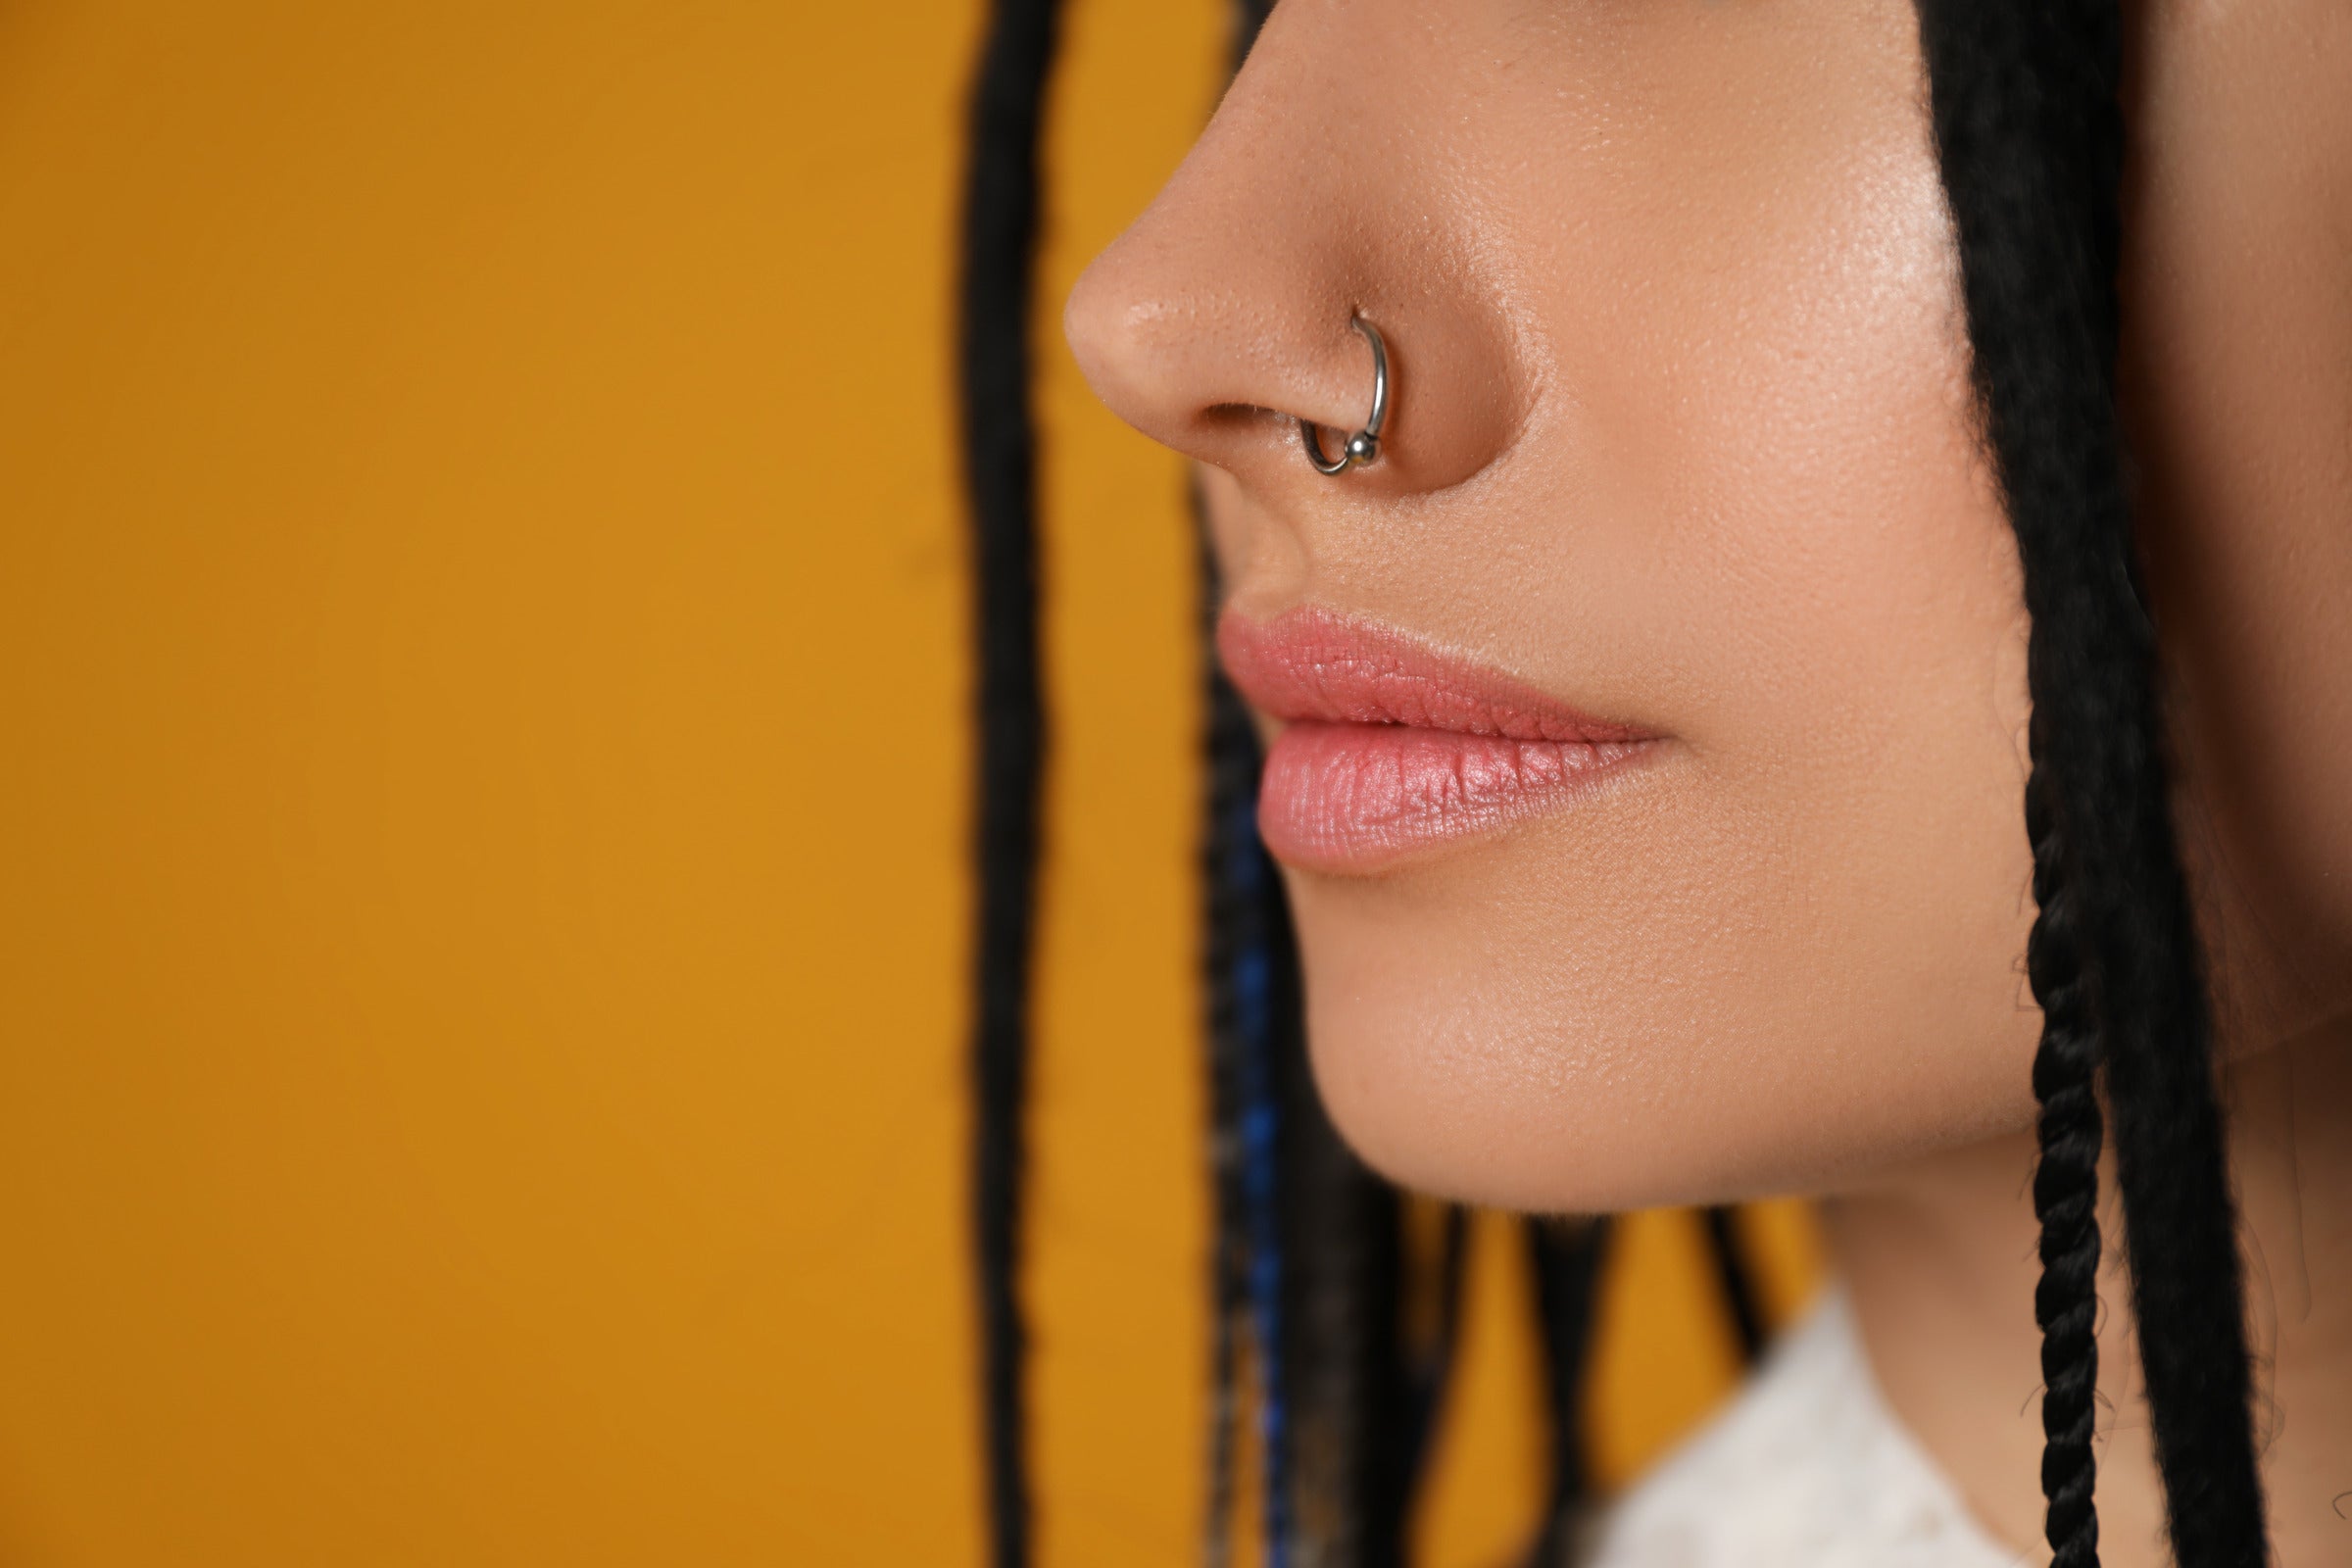 Location Of Nose Piercings Can Cause Bad Smells